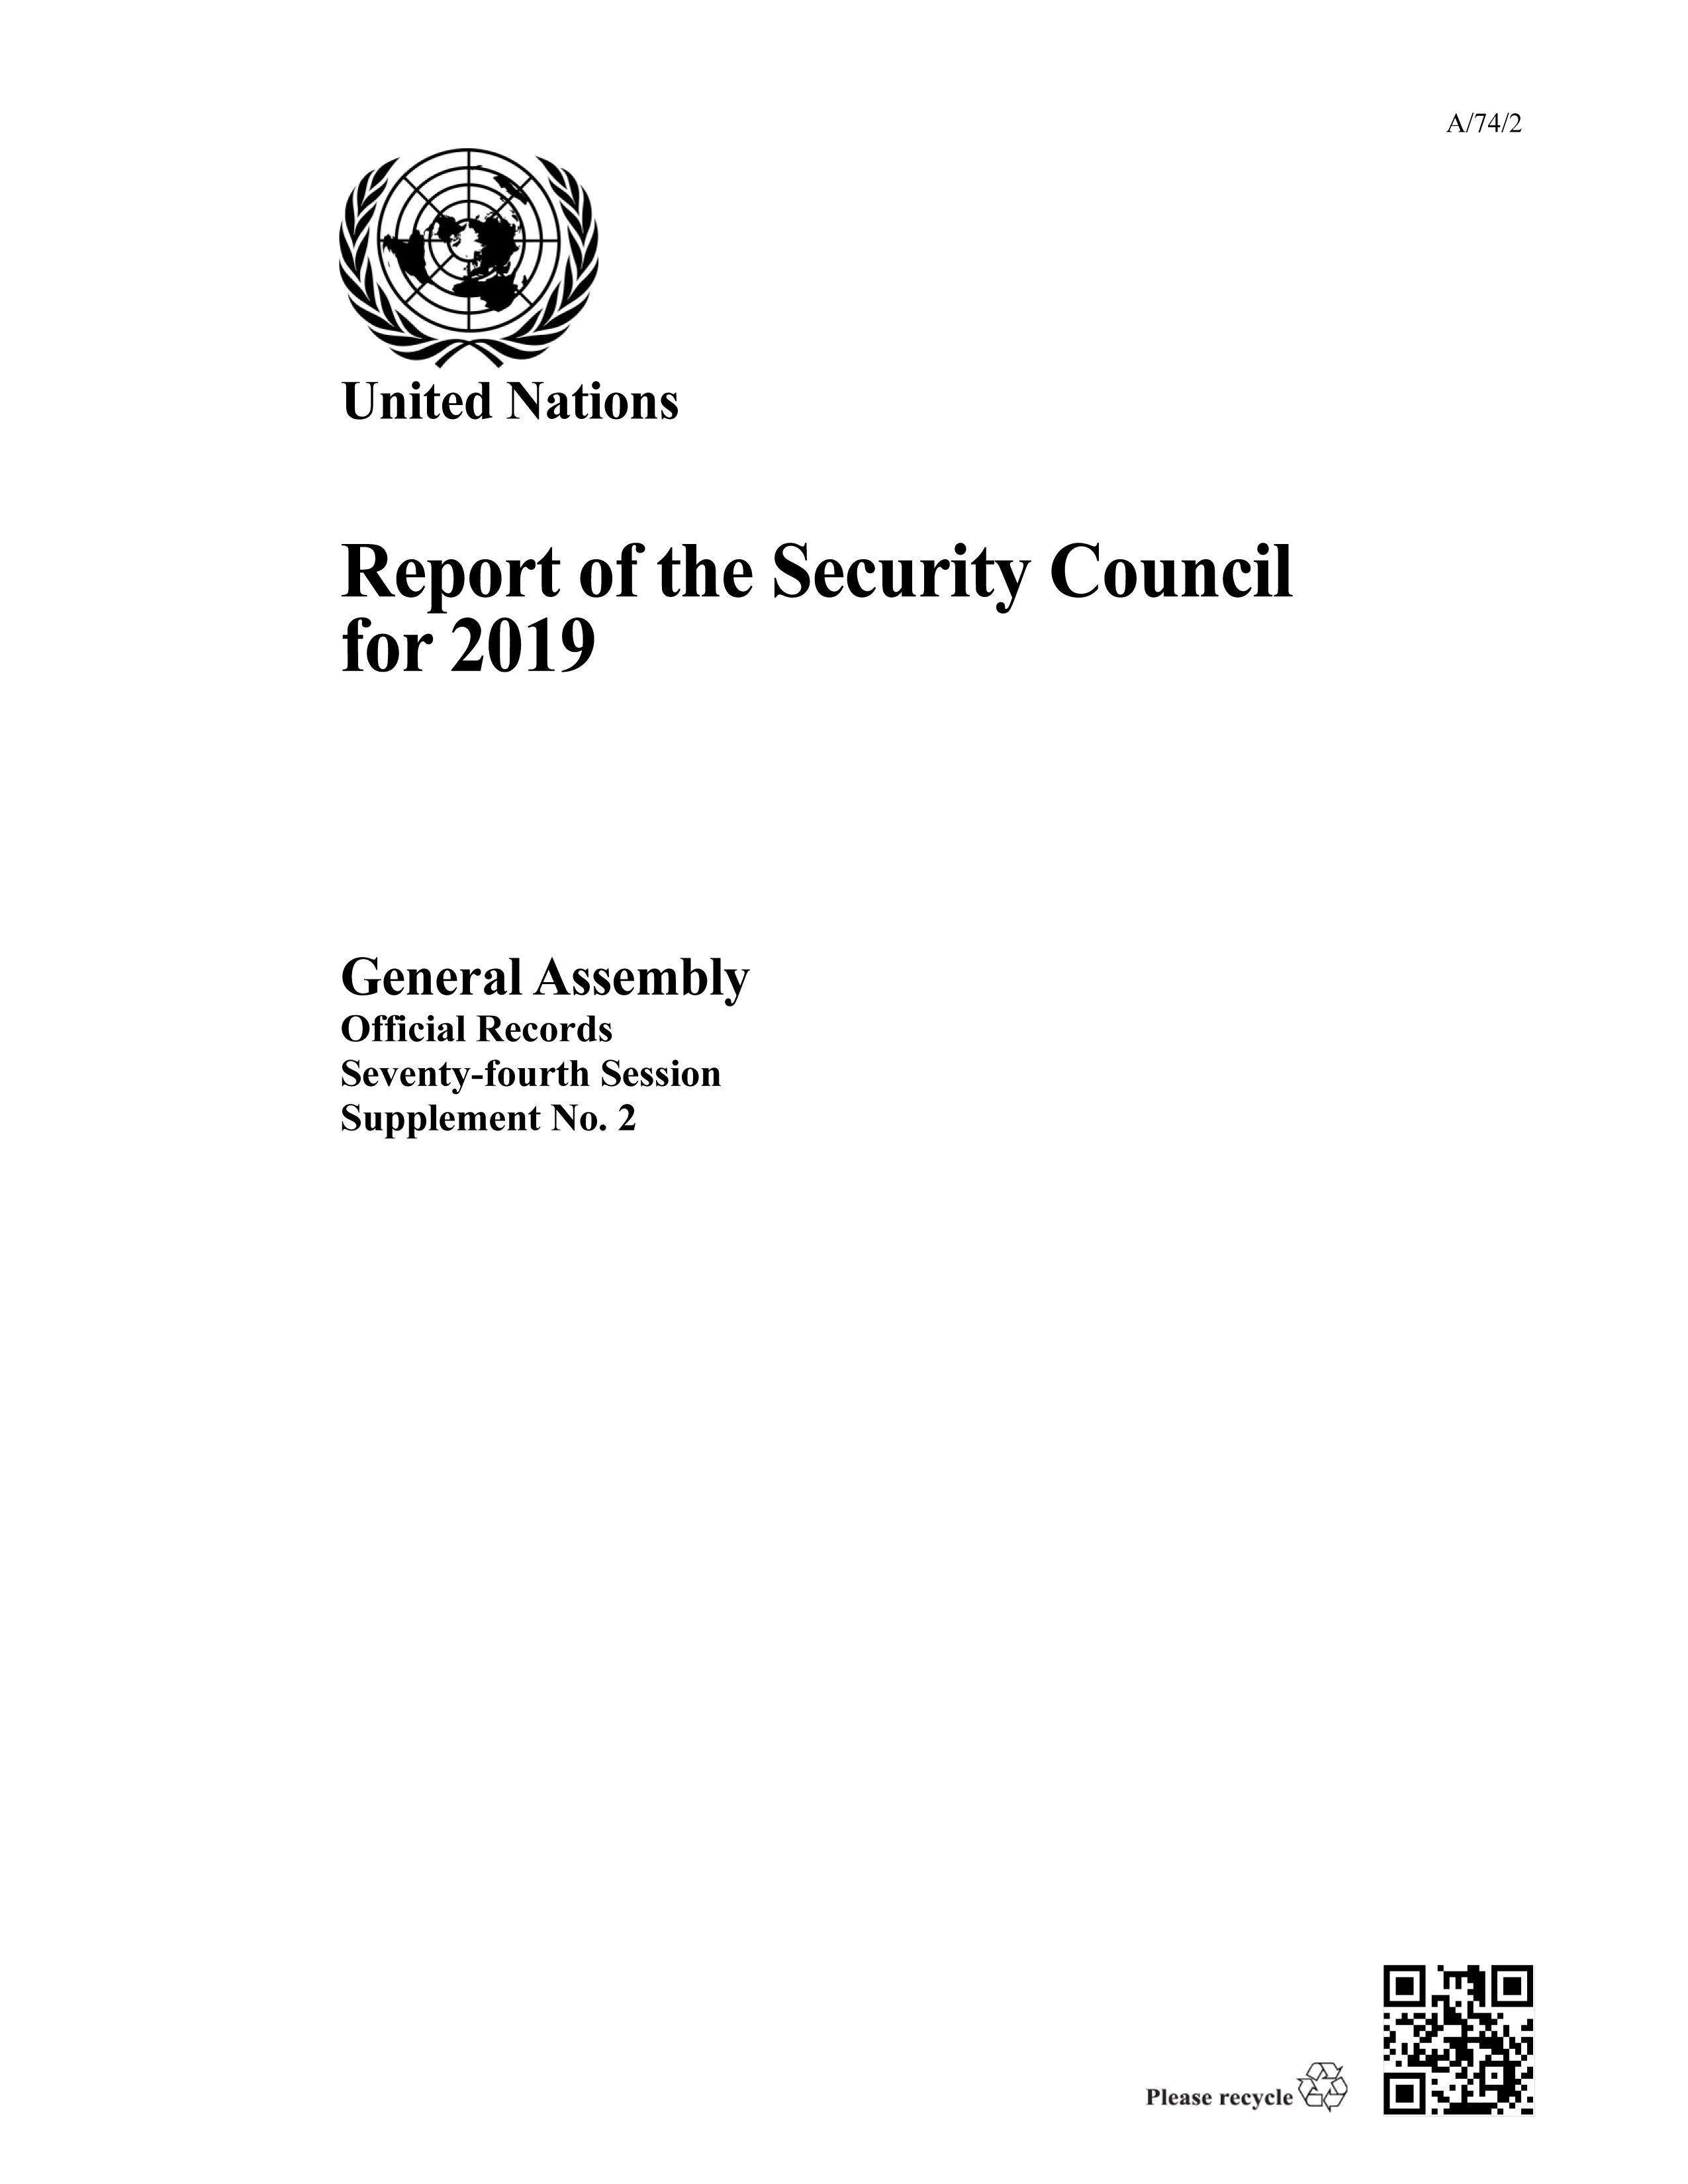 image of Membership of the Security Council during the year 2019